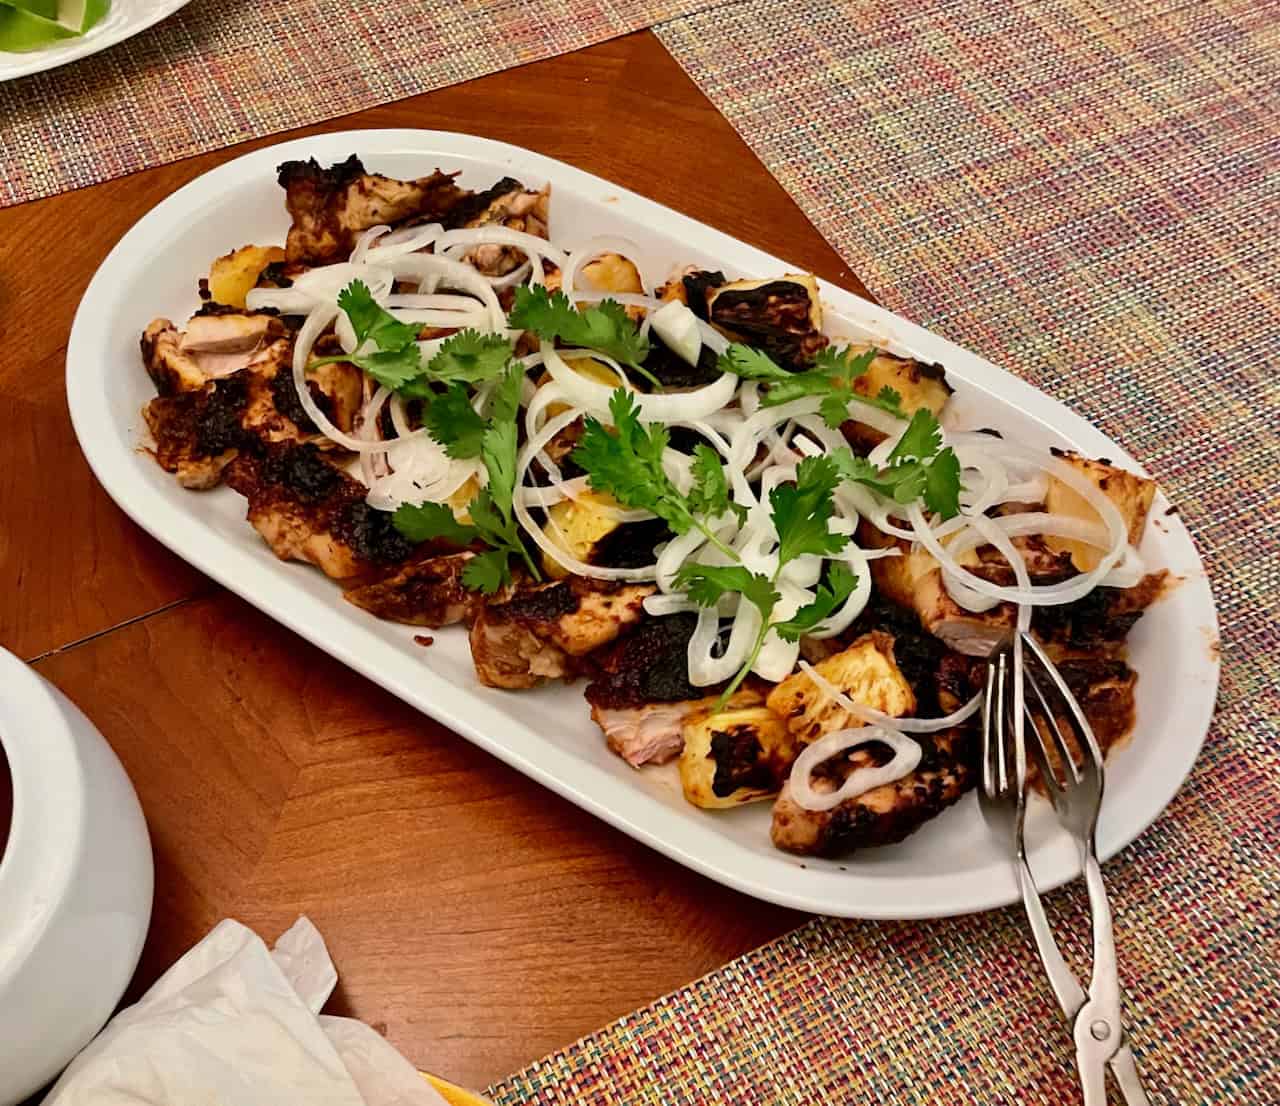 GRILLED OR BROILED, CHICKEN AL PASTOR IS ONE GREAT DISH